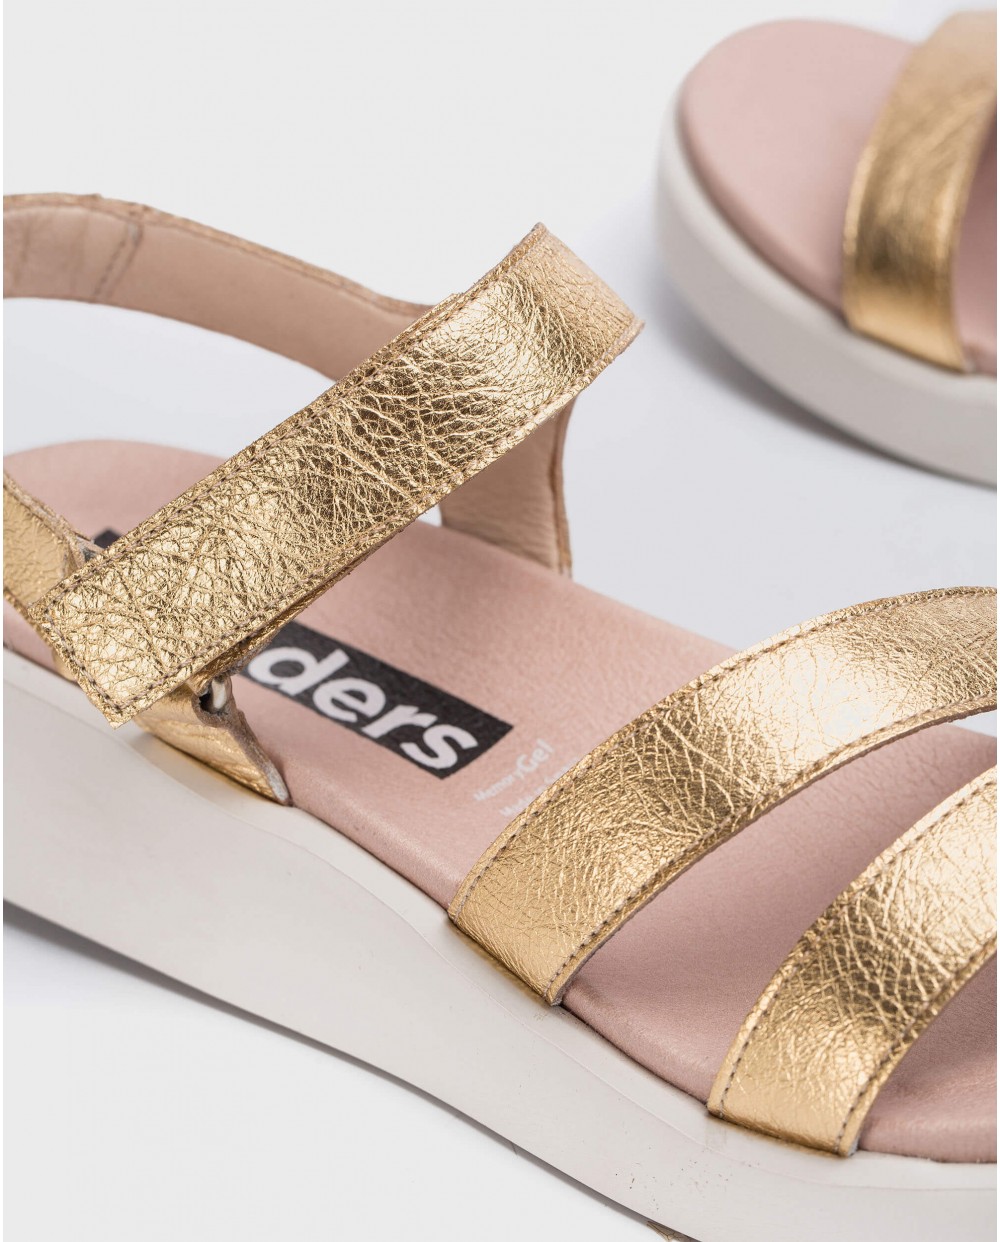 Wonders-Sandals-Leather sandal with strap